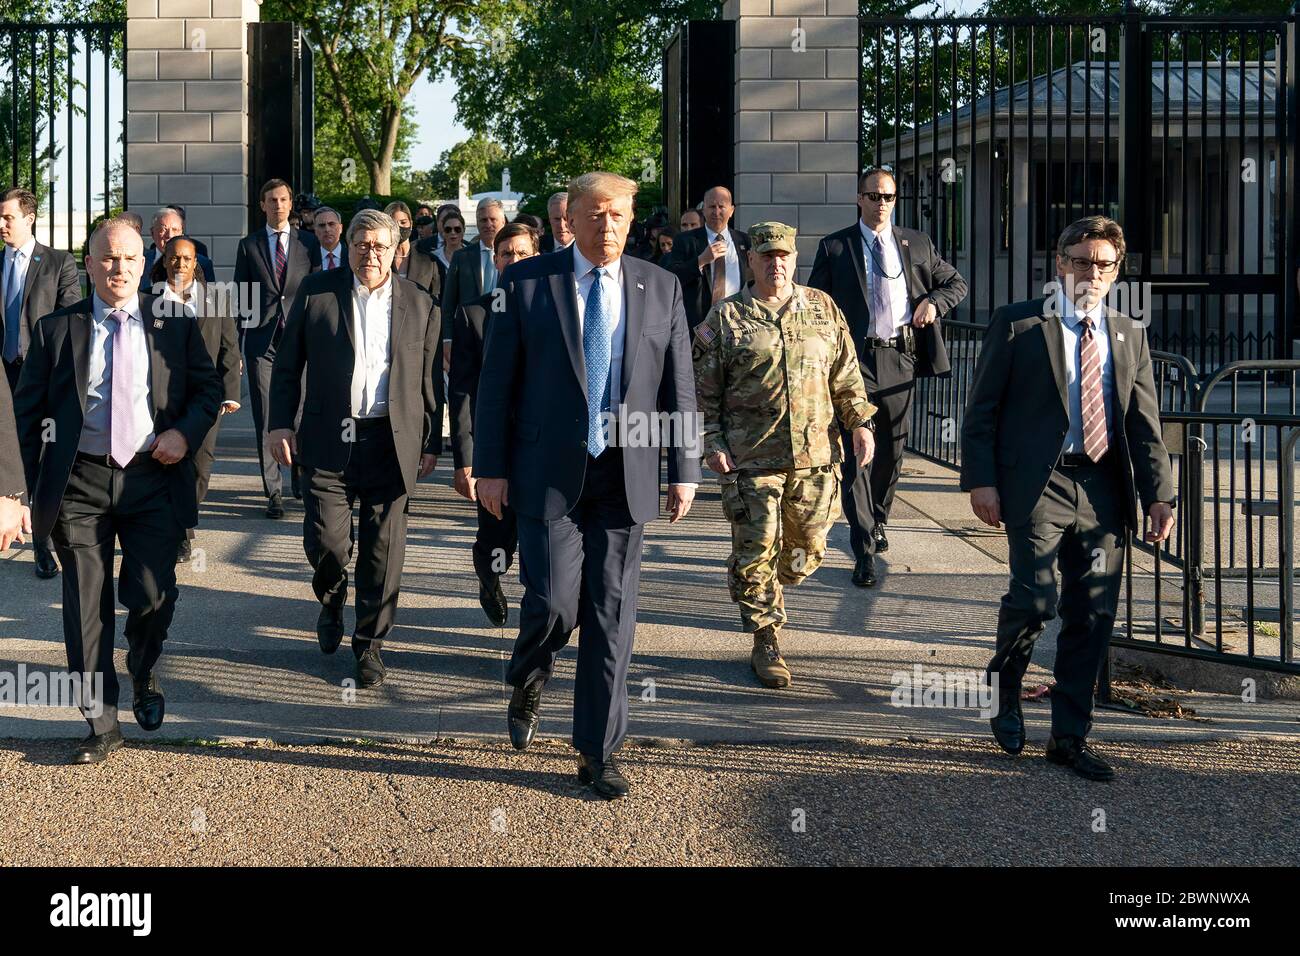 U.S. President Trump Visits St. John's Episcopal Church. President Donald J. Trump walks from the White House Monday evening, June 1, 2020, to St. John’s Episcopal Church, known as the church of Presidents’s, that was damaged by fire during demonstrations in nearby LaFayette Square Sunday evening. General Mark Milley walks behind Trump and breaks off shortly after he realizes that he's been 'set up' by Trump to be in a political visual. Stock Photo